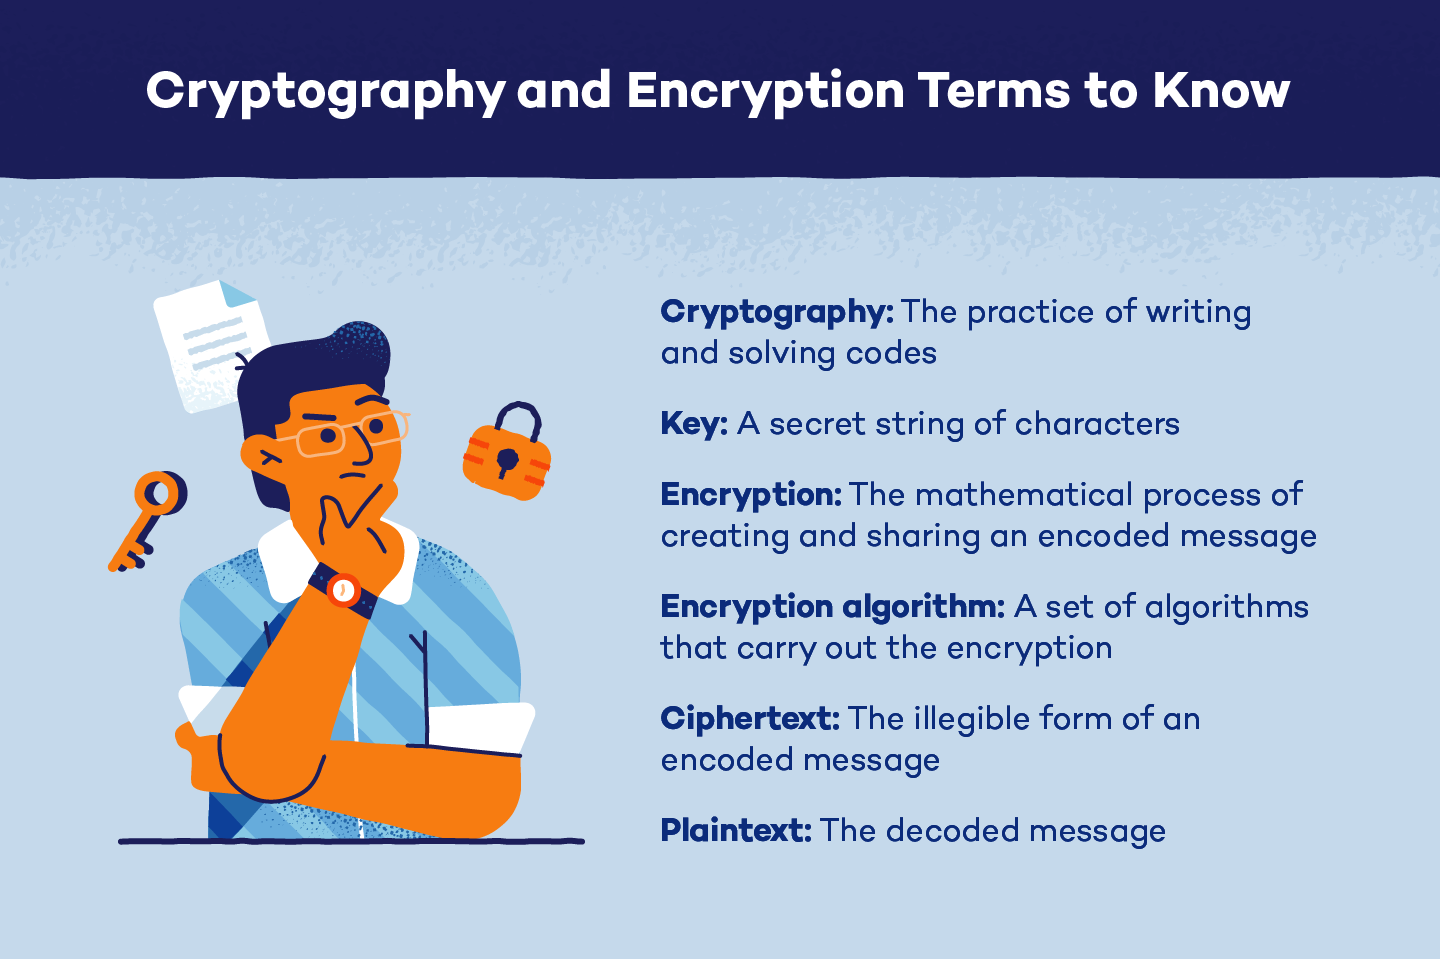 summary of cryptography and encryption terms to know